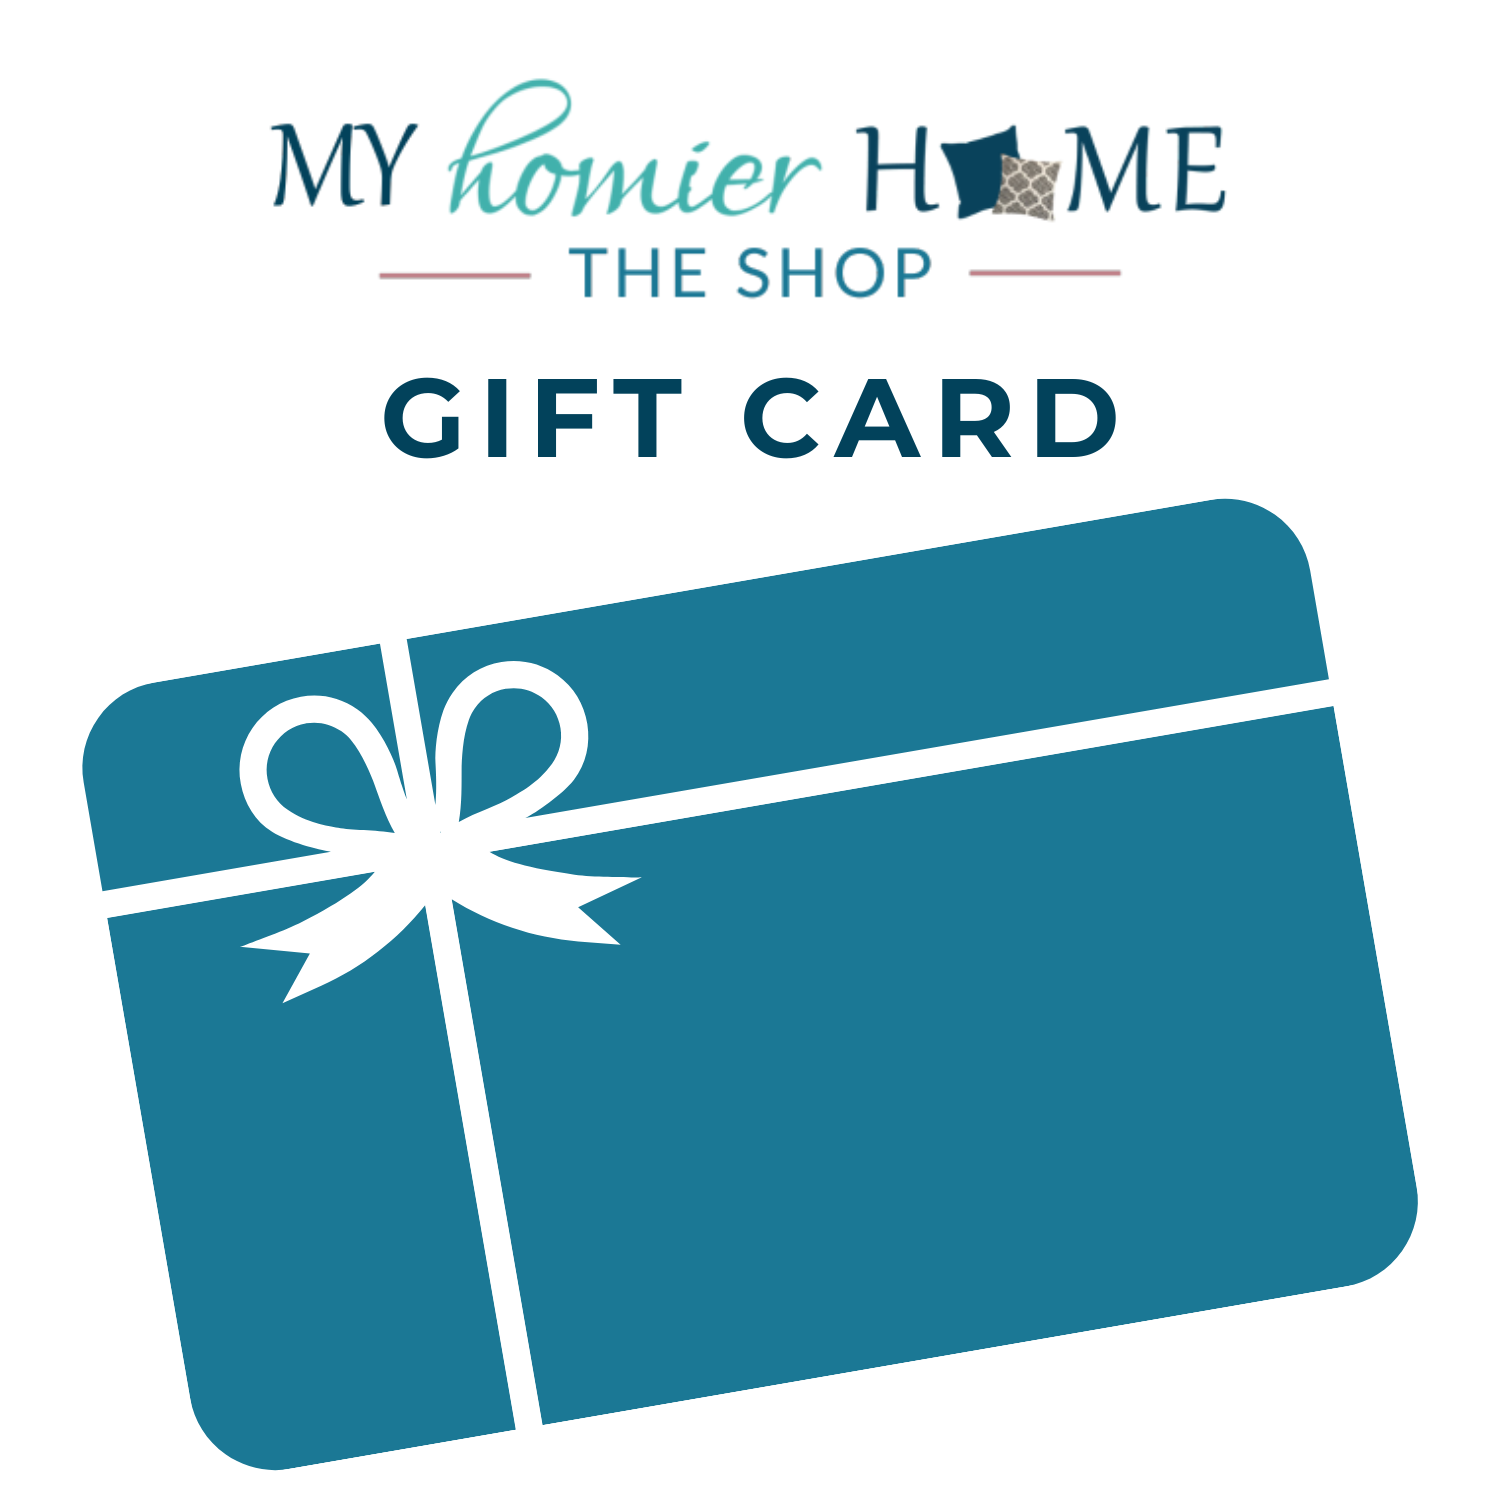 My Homier Home Gift Card